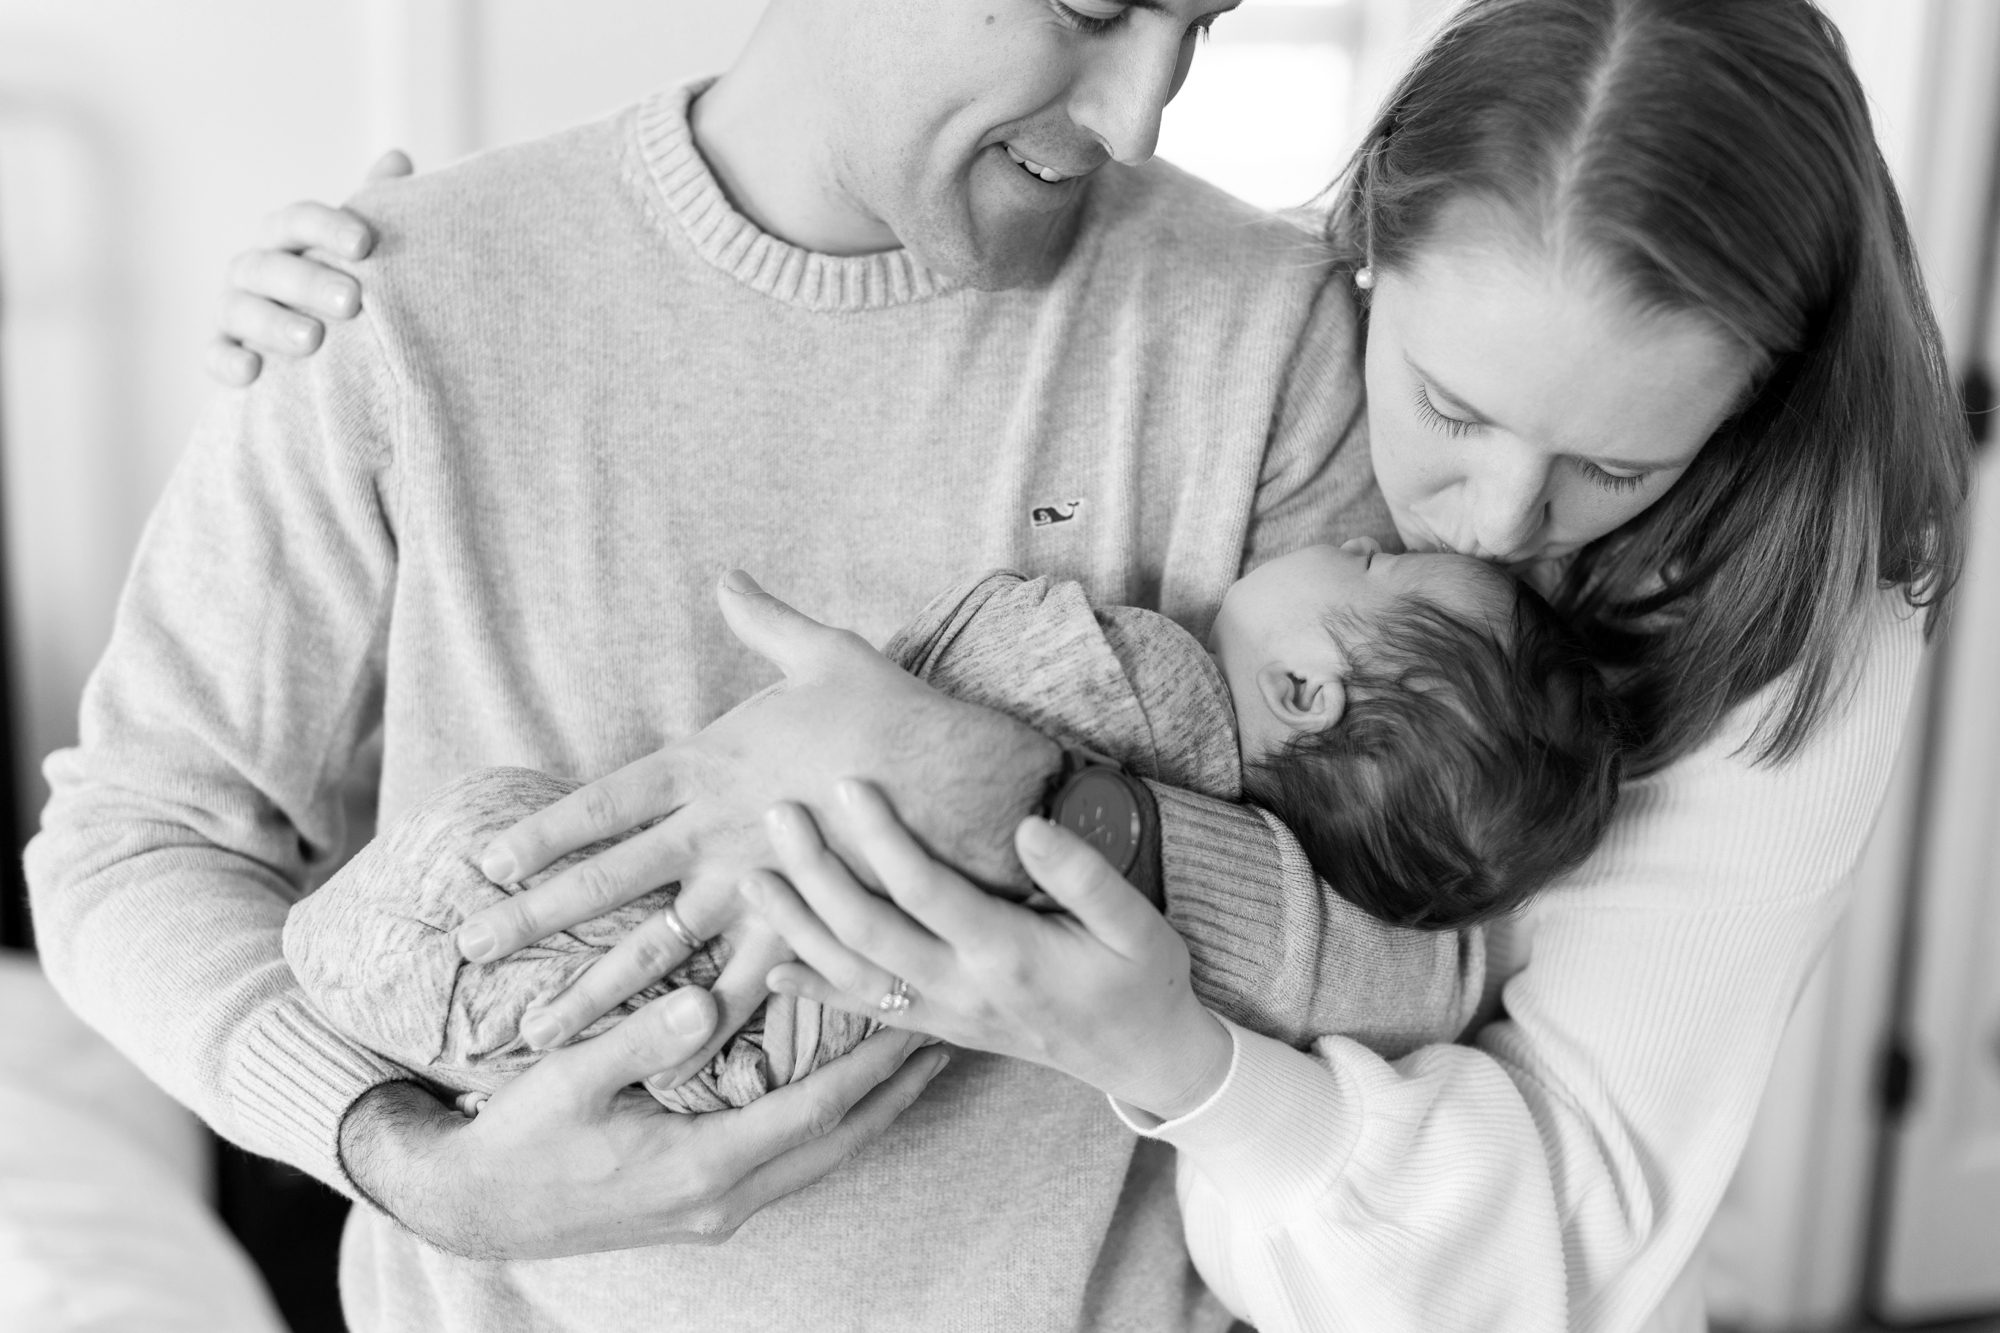 the parents kissed the baby during the newborn photos